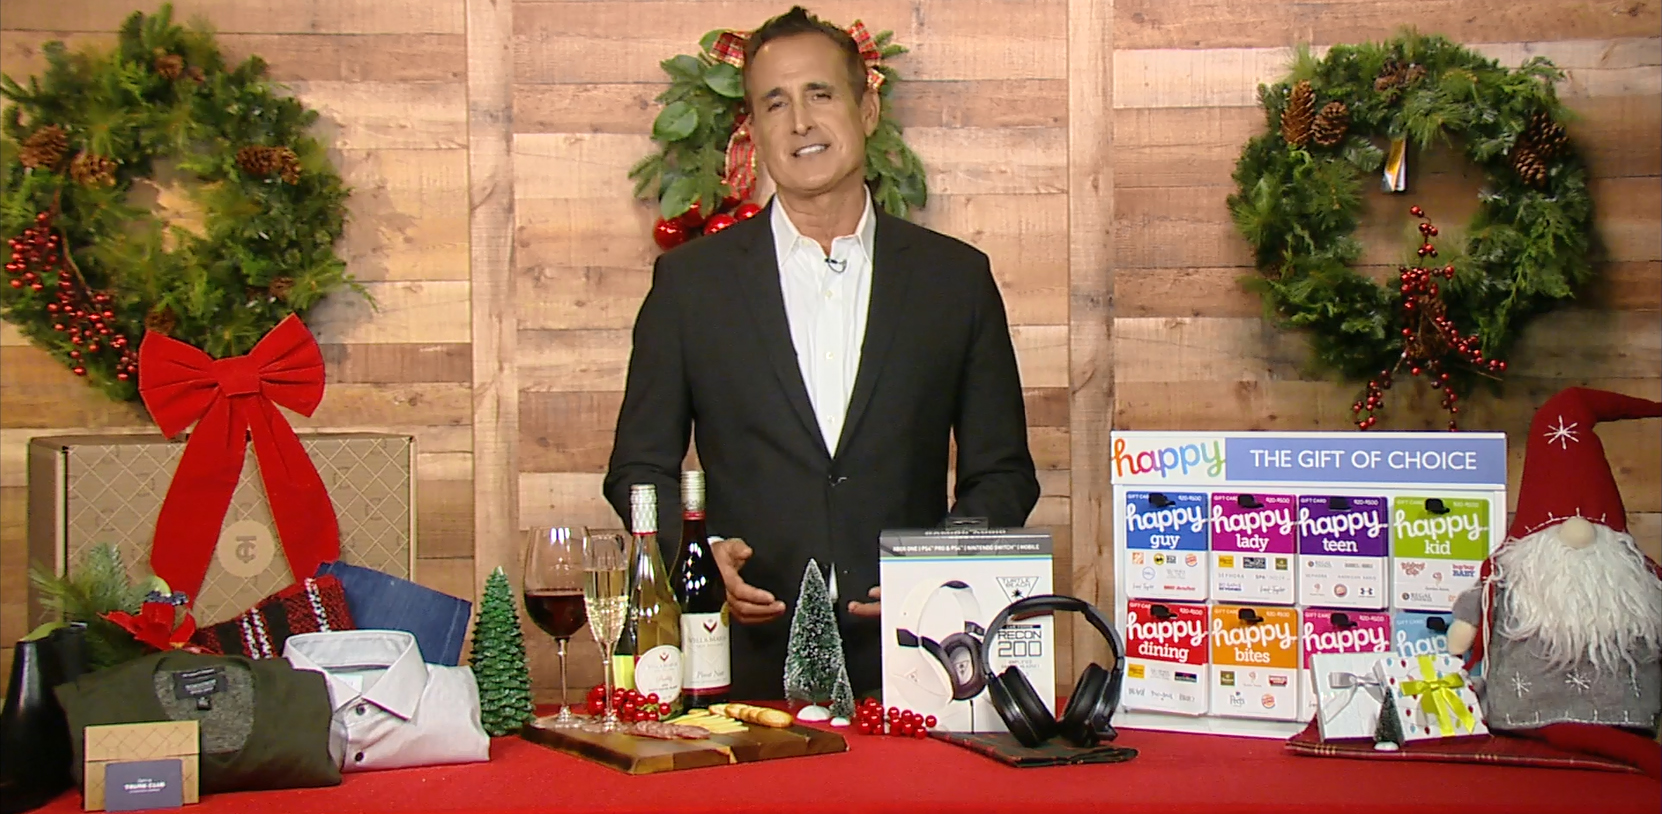 Survive the holidays with gift ideas for everyone and every budget. Consumer trends expert Andrew Krasny shares his gift giving guide for this season.